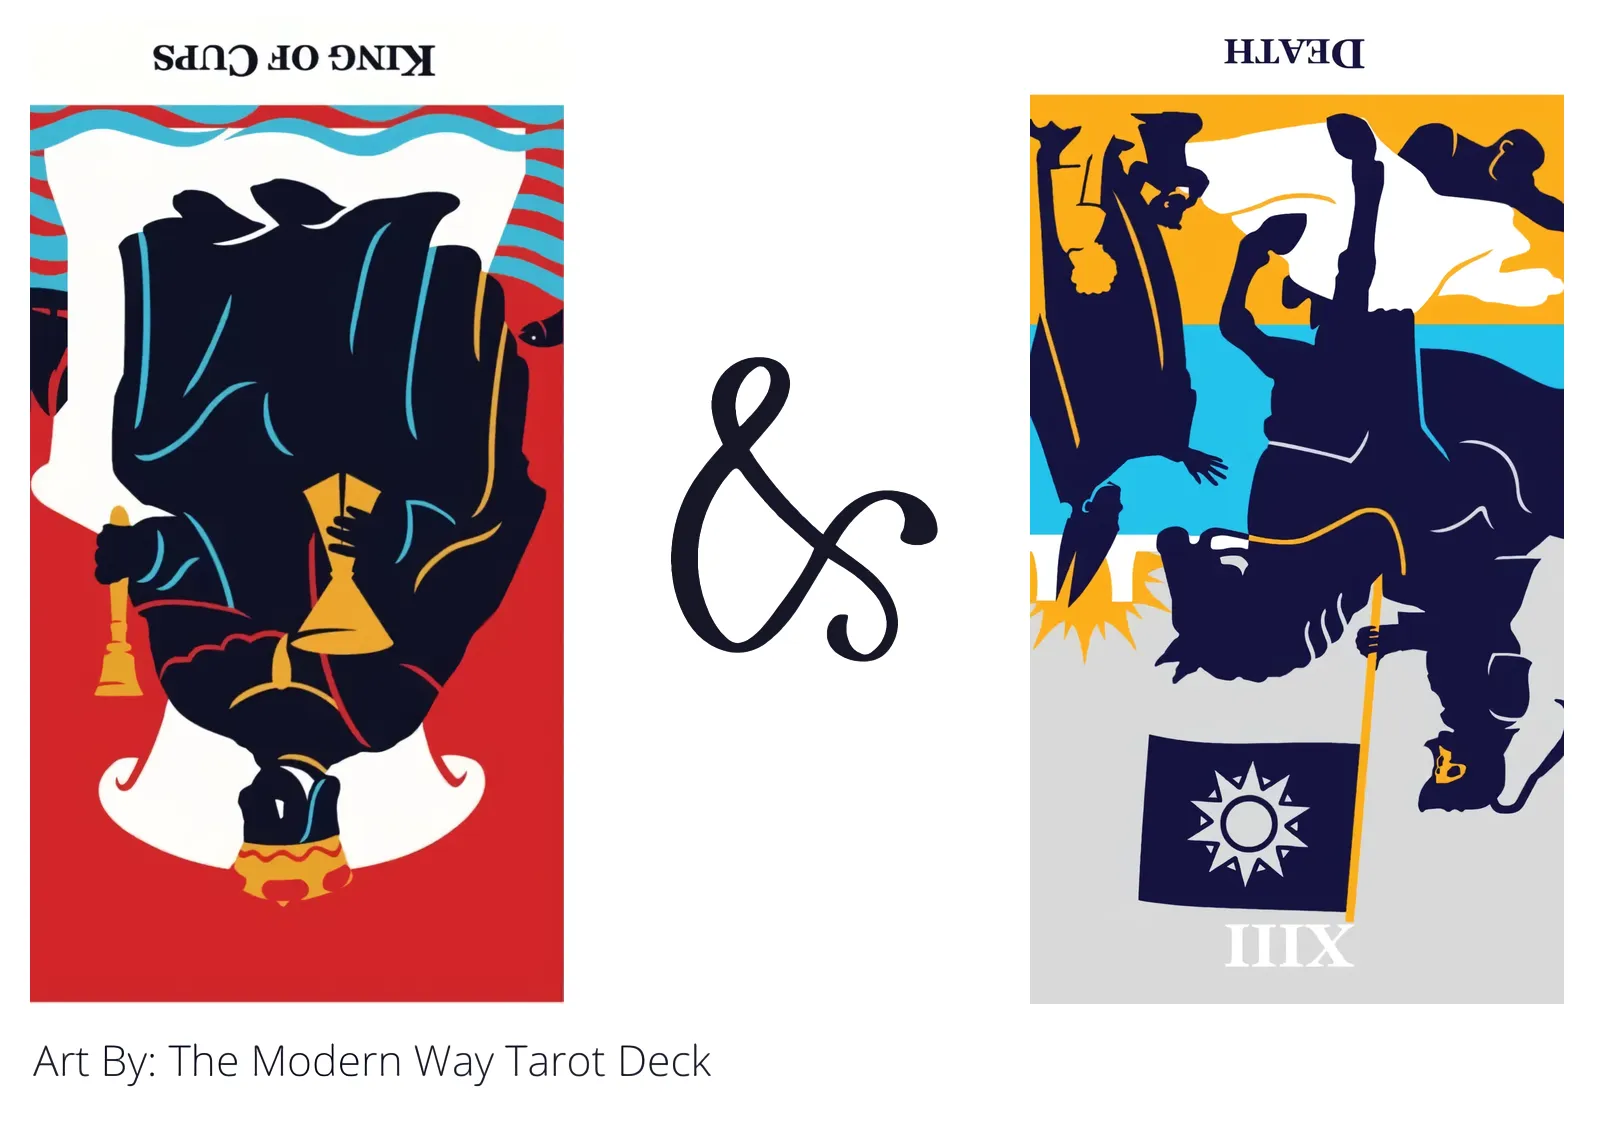 king of cups reversed and death reversed tarot cards together